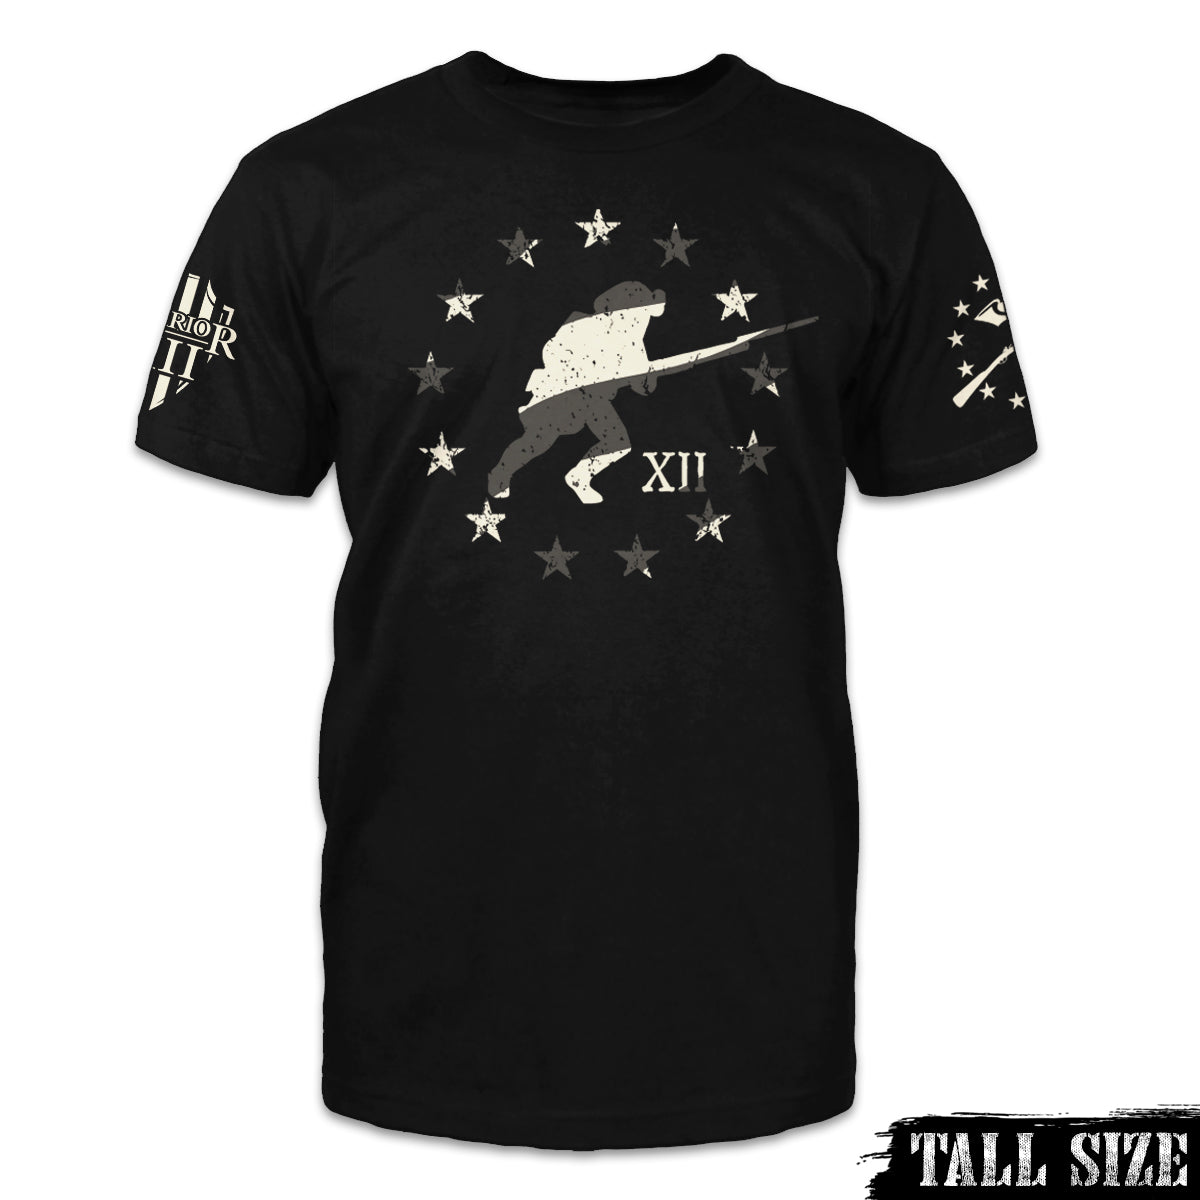 A black tall size shirt with a soldier running with stars around him in a circle printed on the front of the shirt.